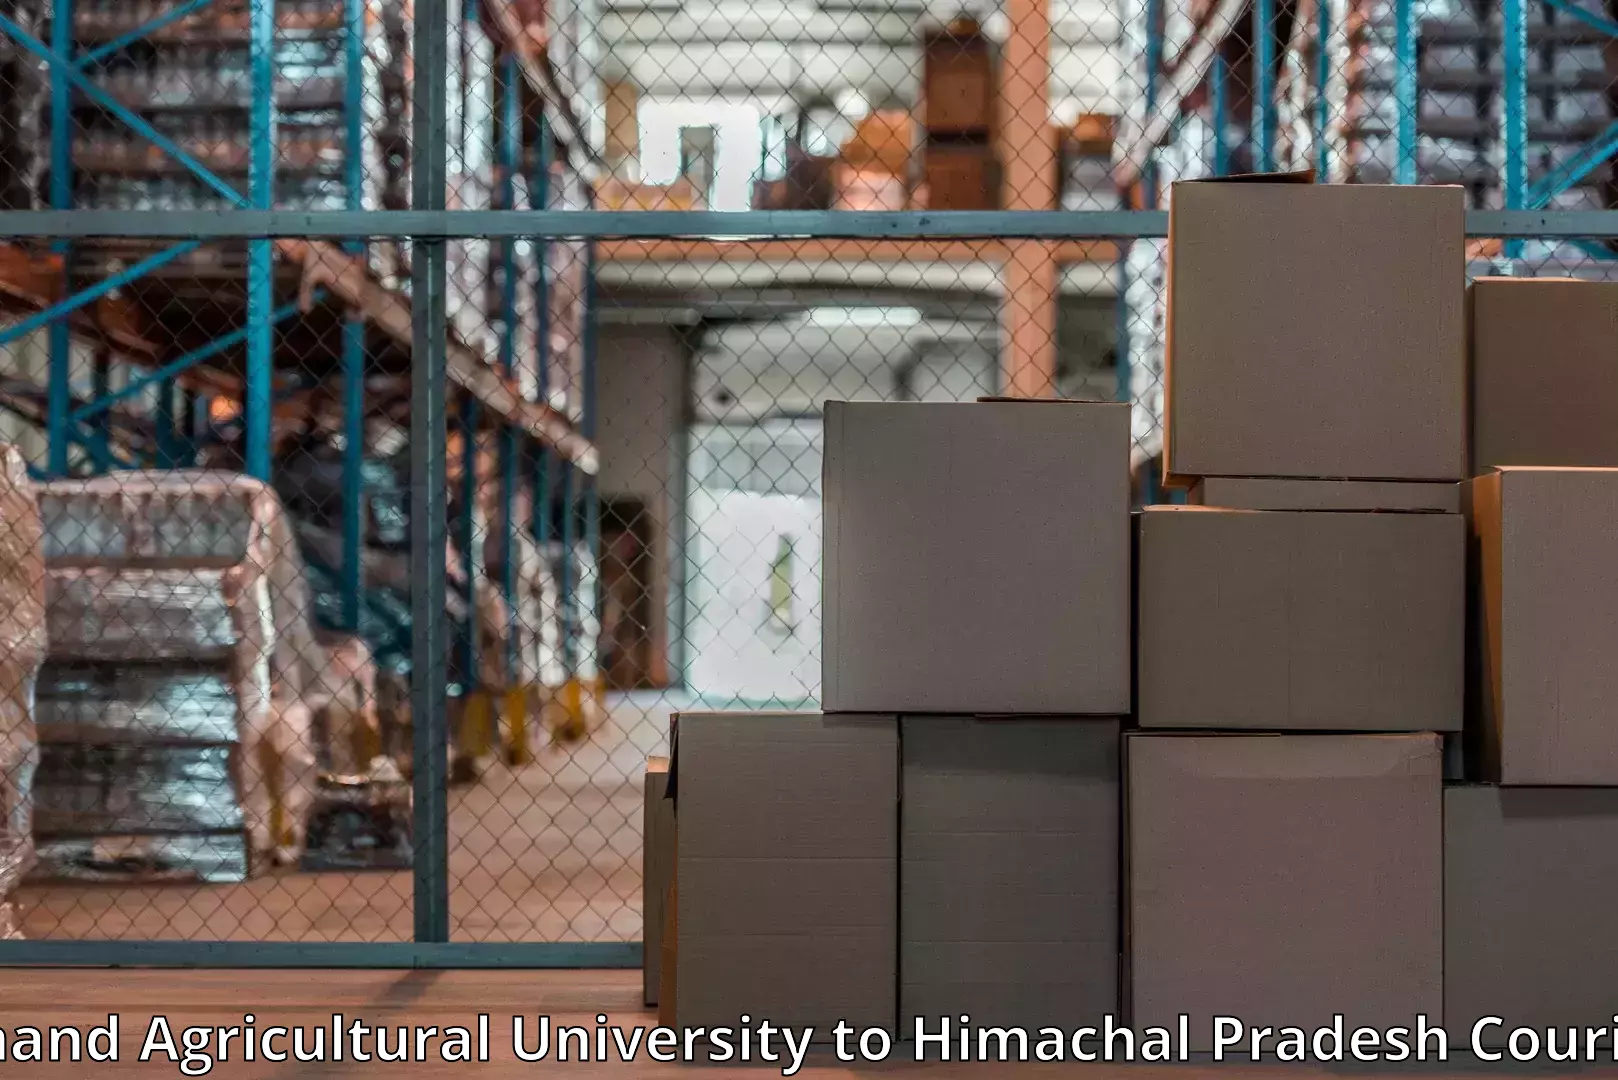 Quality moving company Anand Agricultural University to Bharari